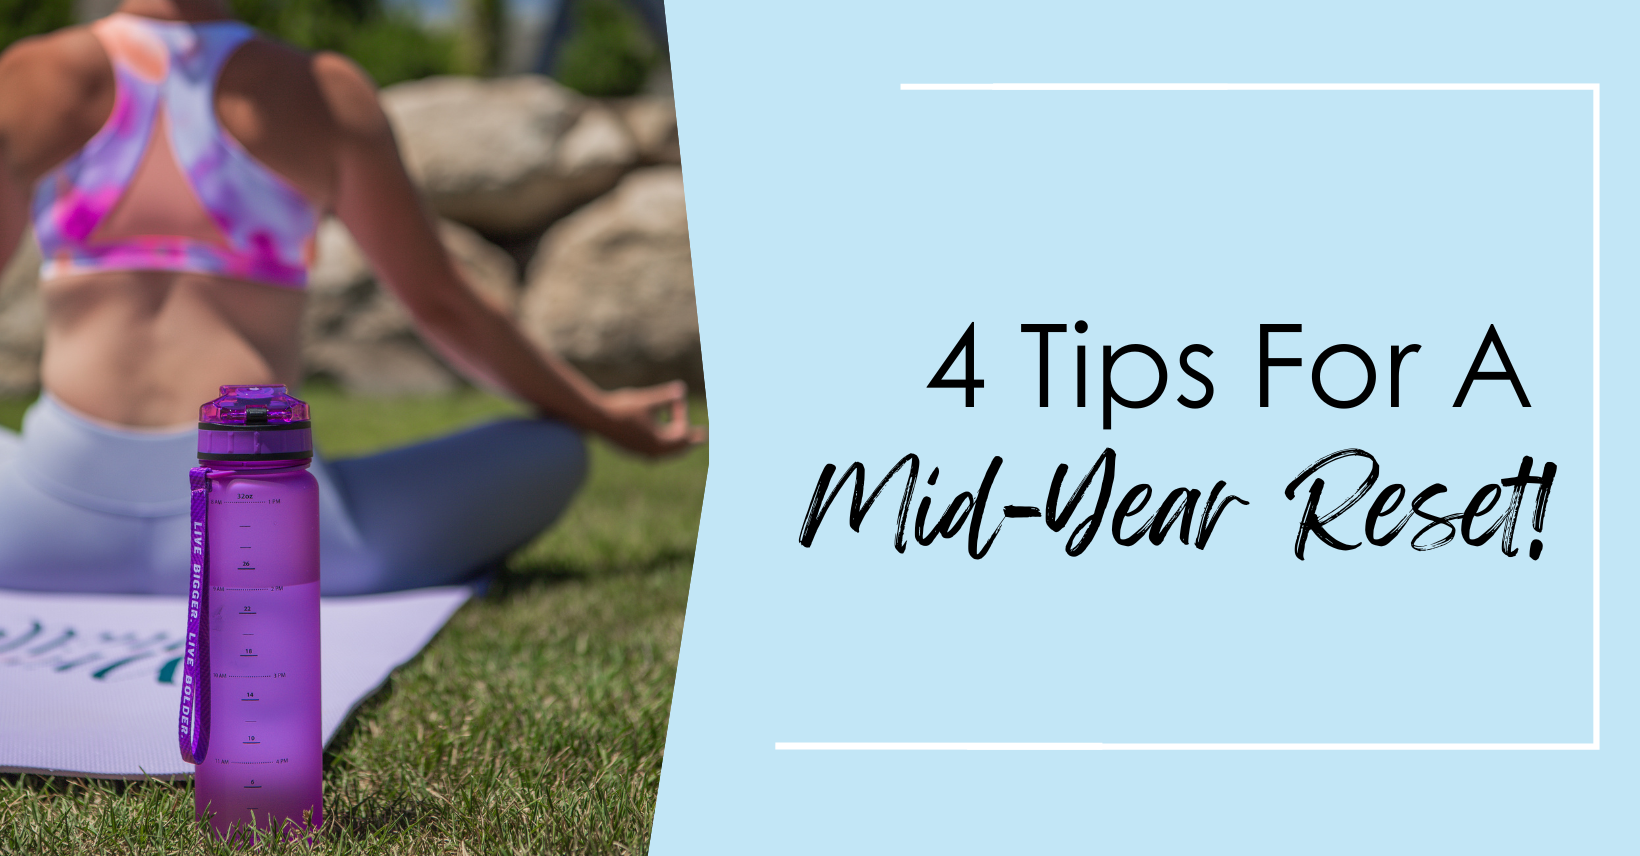 4 Tips For a Mid Year Reset